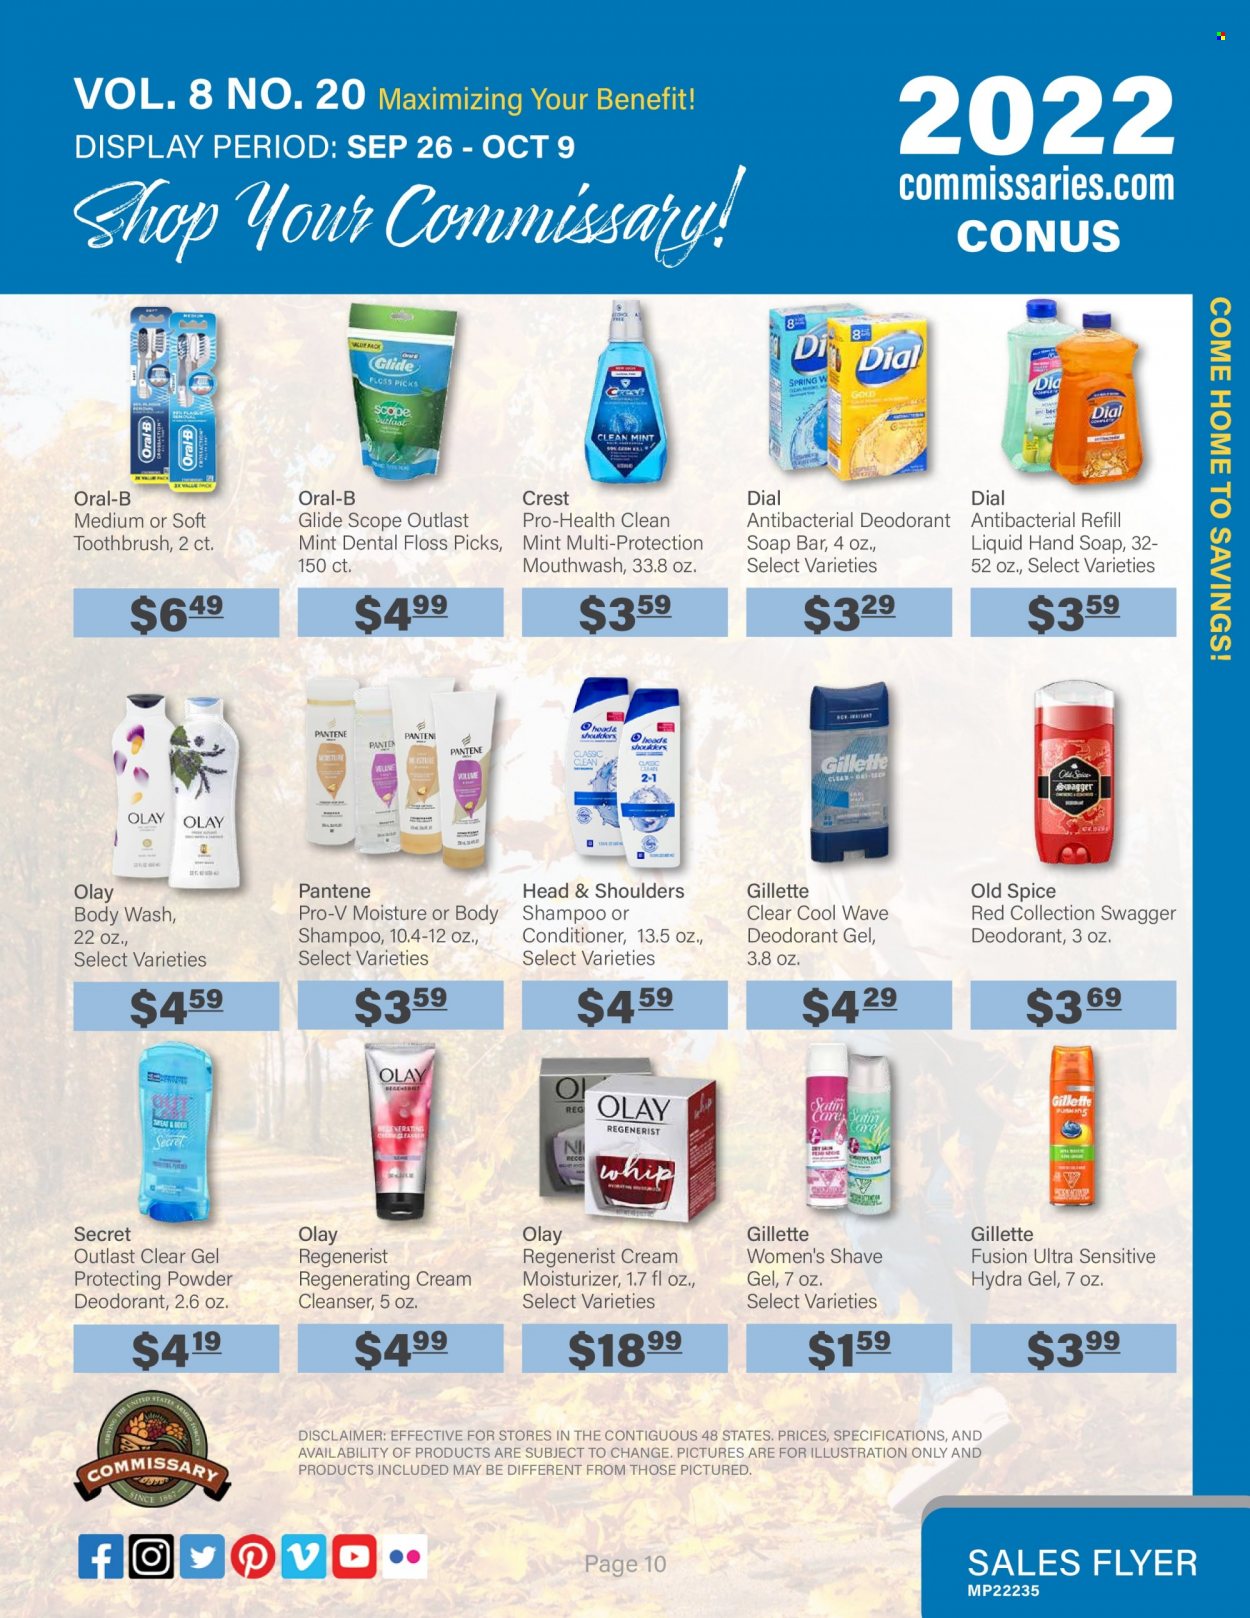 thumbnail - Commissary Flyer - 09/26/2022 - 10/09/2022 - Sales products - spice, WAVE, body wash, shampoo, hand soap, Old Spice, soap bar, Dial, soap, toothbrush, Oral-B, mouthwash, Crest, cleanser, moisturizer, Olay, conditioner, Head & Shoulders, Pantene, anti-perspirant, deodorant, Gillette, shave gel. Page 10.